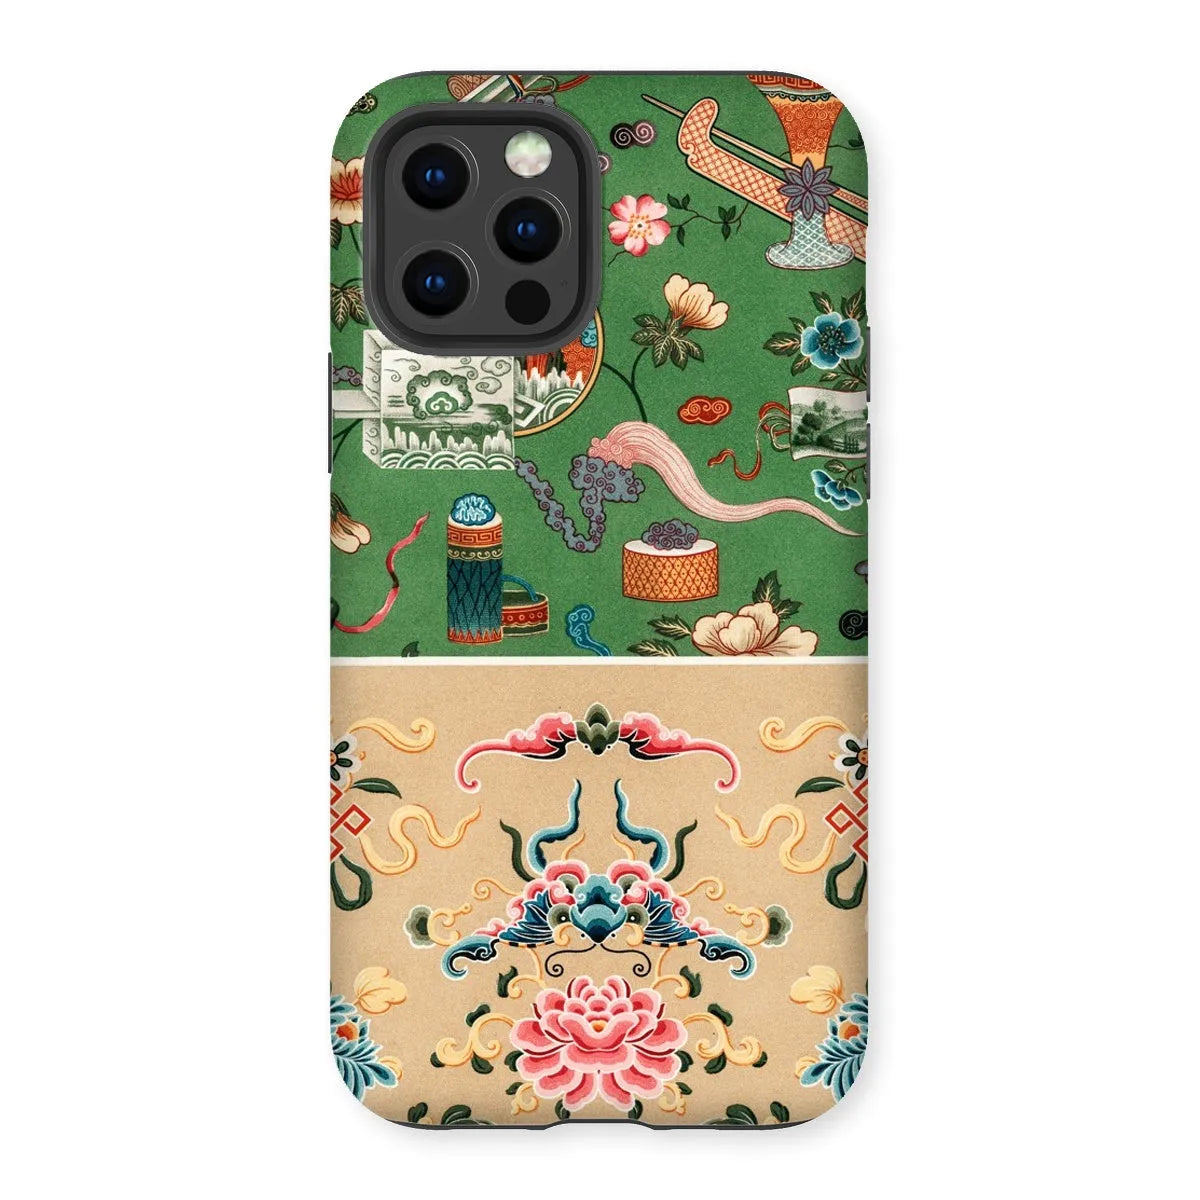 This Chinese Pattern By Auguste Racinet Tough Phone Case - Iphone 12 Pro / Matte - Mobile Phone Cases - Aesthetic Art